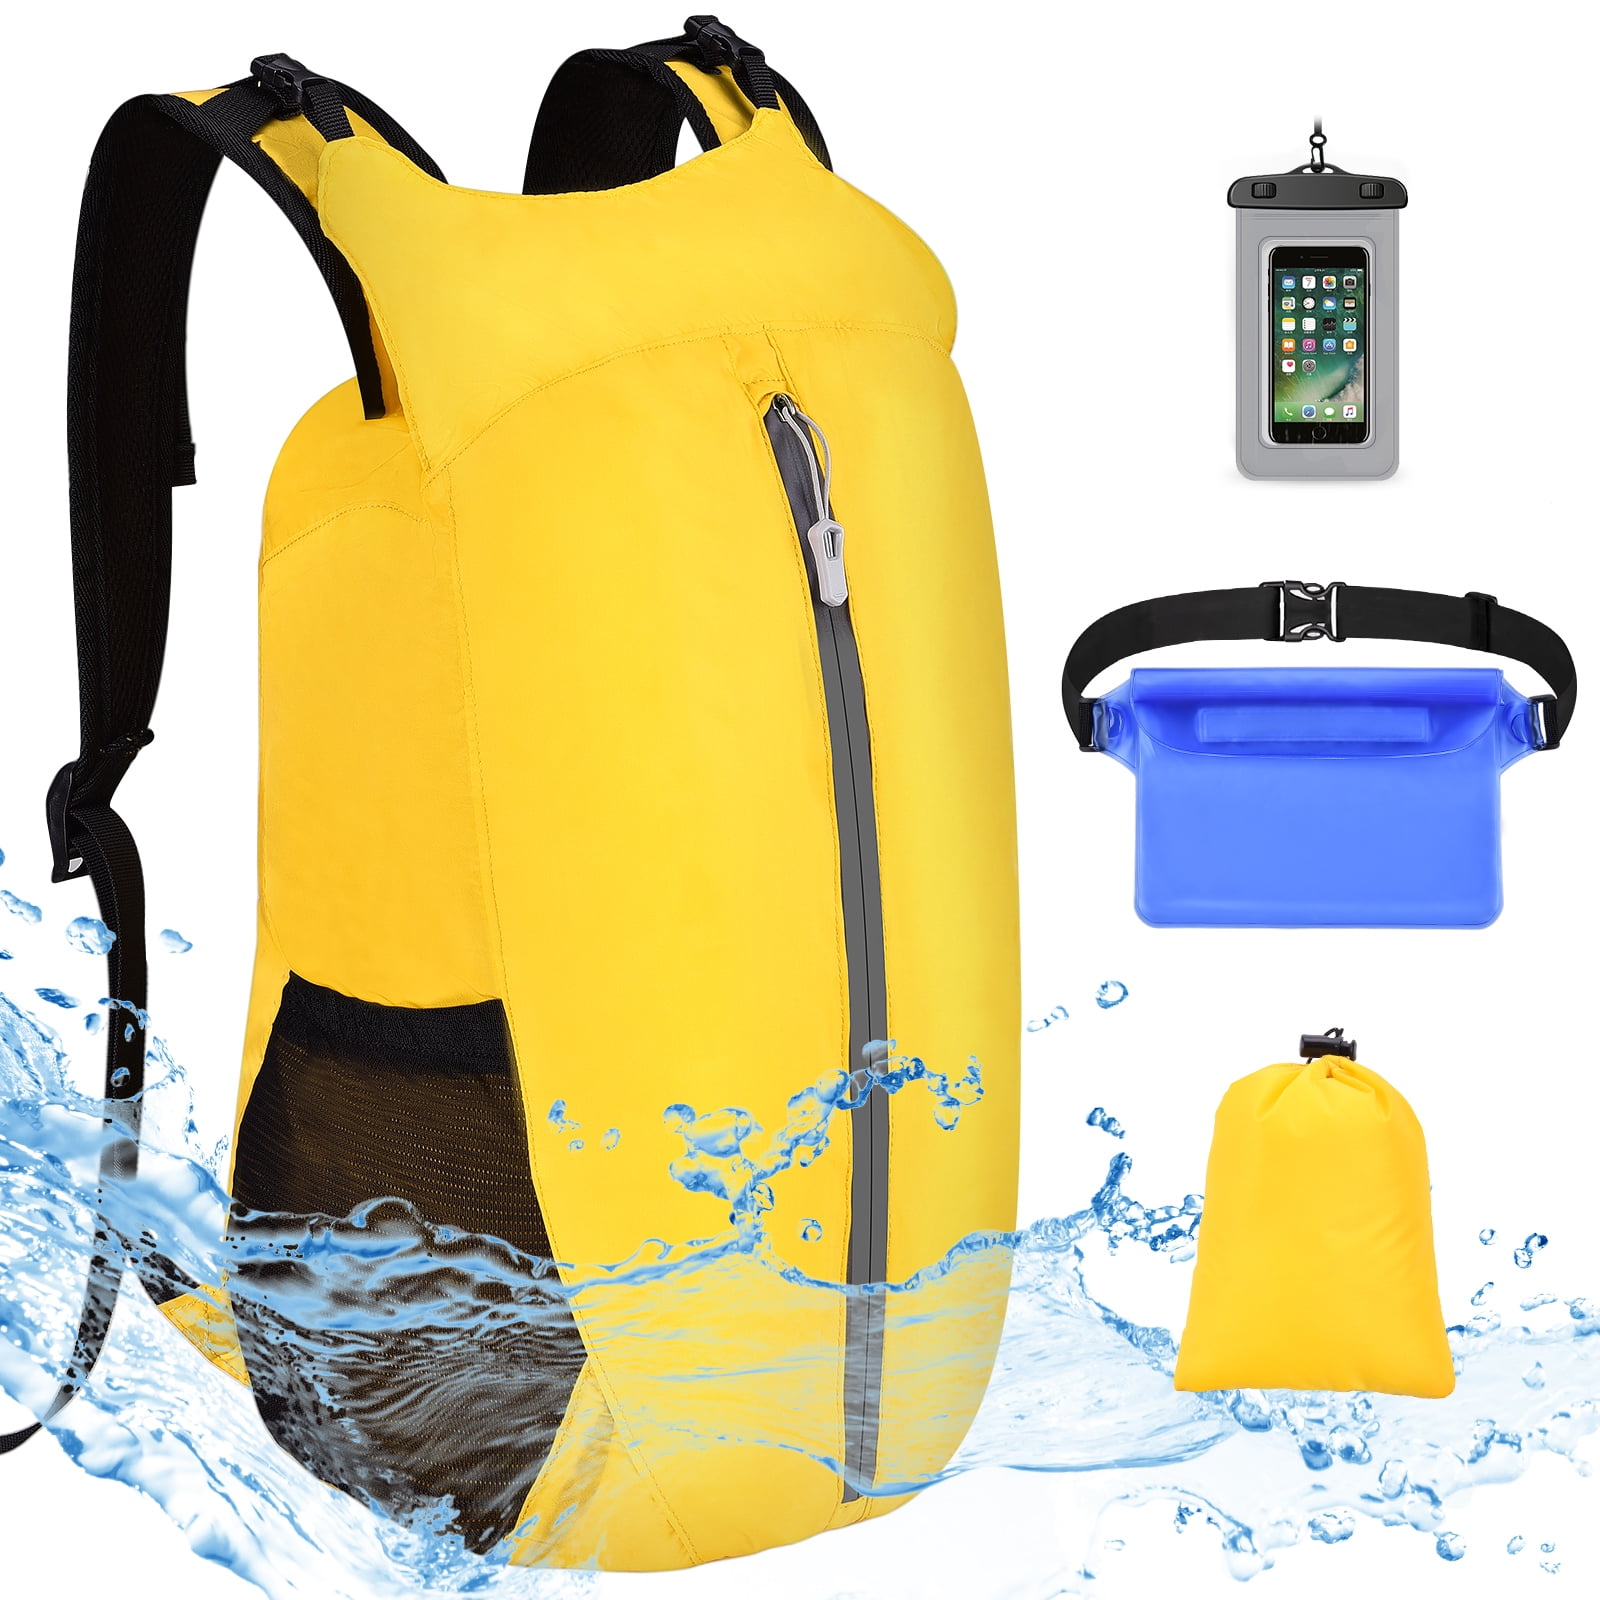 VGEBY1 Premium Storage Dry Bags Perfect for Outdoor Activities Sack with Phone Dry Bag and Long Adjustable Shoulder Strap Included